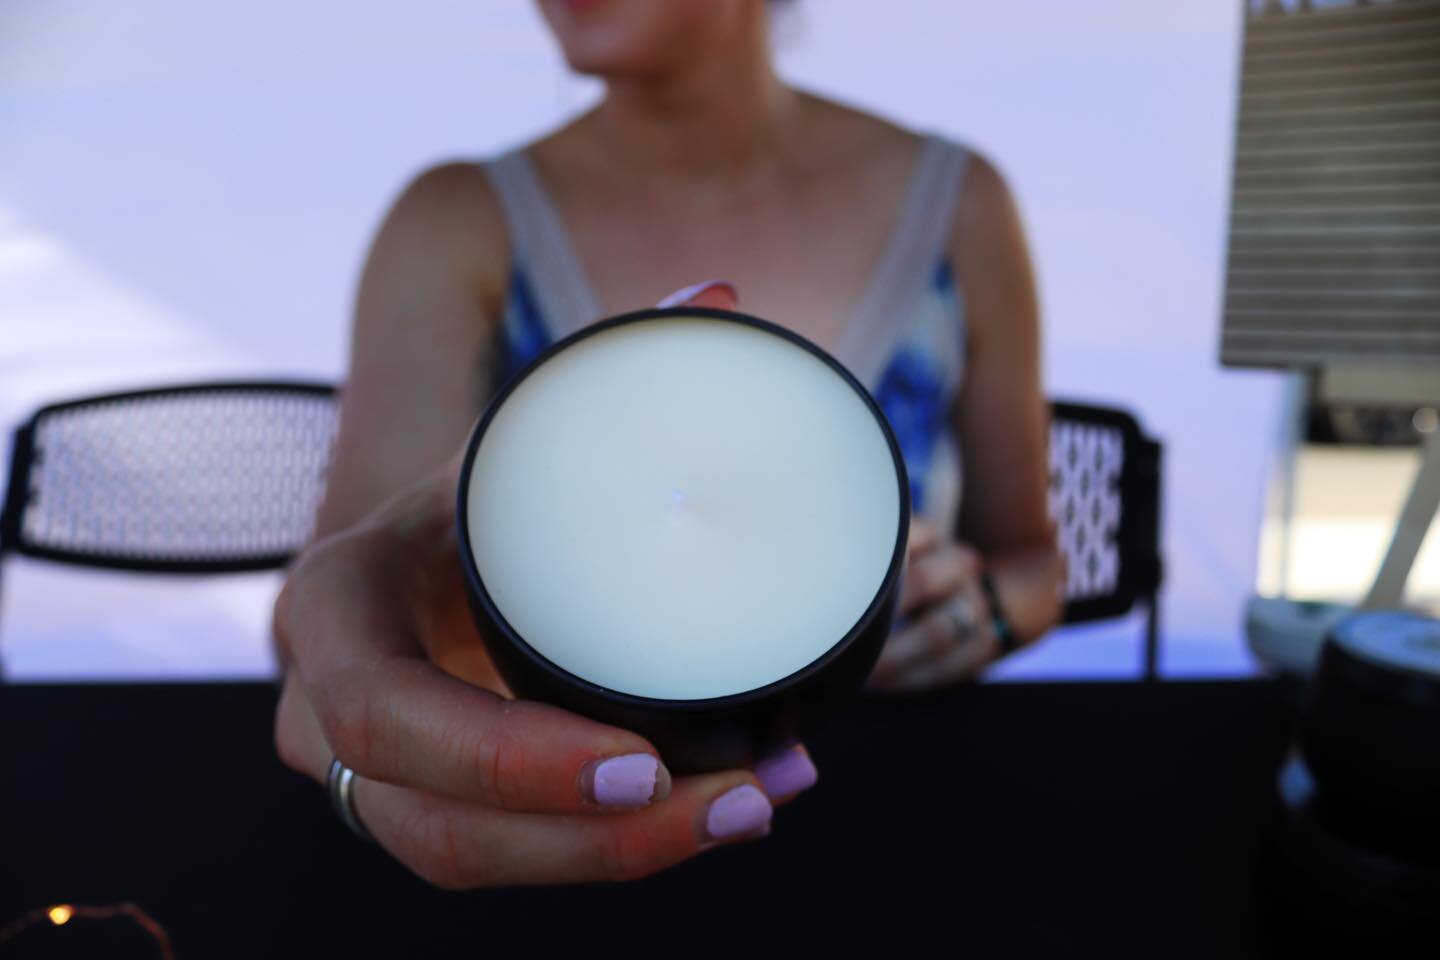 evening markets are where it&rsquo;s at for you summertime candle lovers 🙌🏽

I&rsquo;ll be back at the Square with @destinationsunnysideofficial tonight from 5-9 to kick off your holiday weekend 🇺🇸

Smell ya later! 🕯😉
.
.
.

#cementcandle #cand